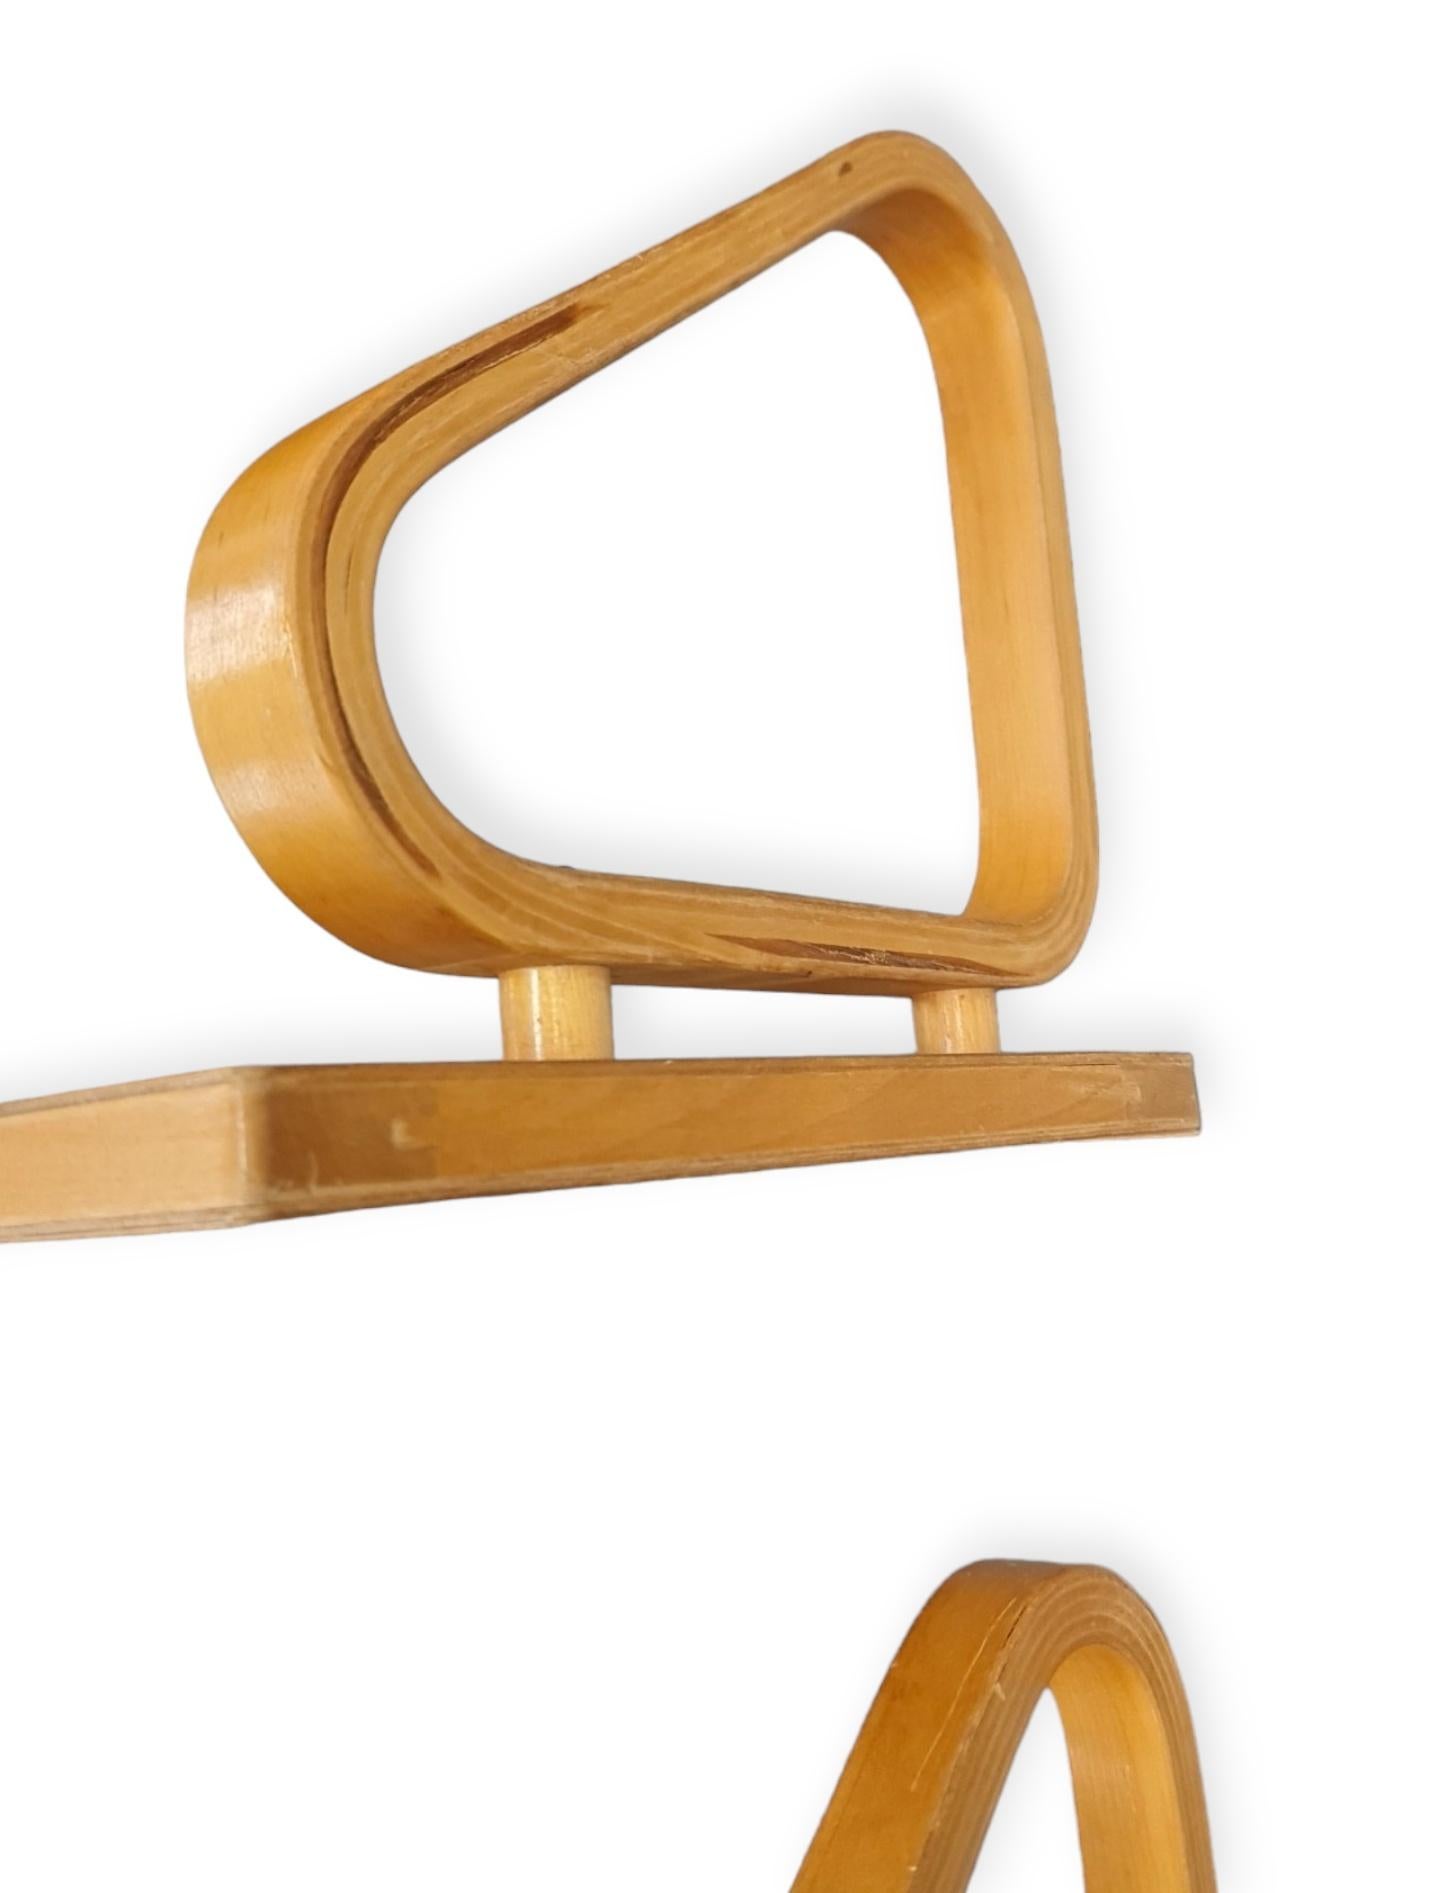 Finnish Rare Set of 4 Alvar Aalto Wall Shelves Model 112 with Pegs, 1930s.  For Sale